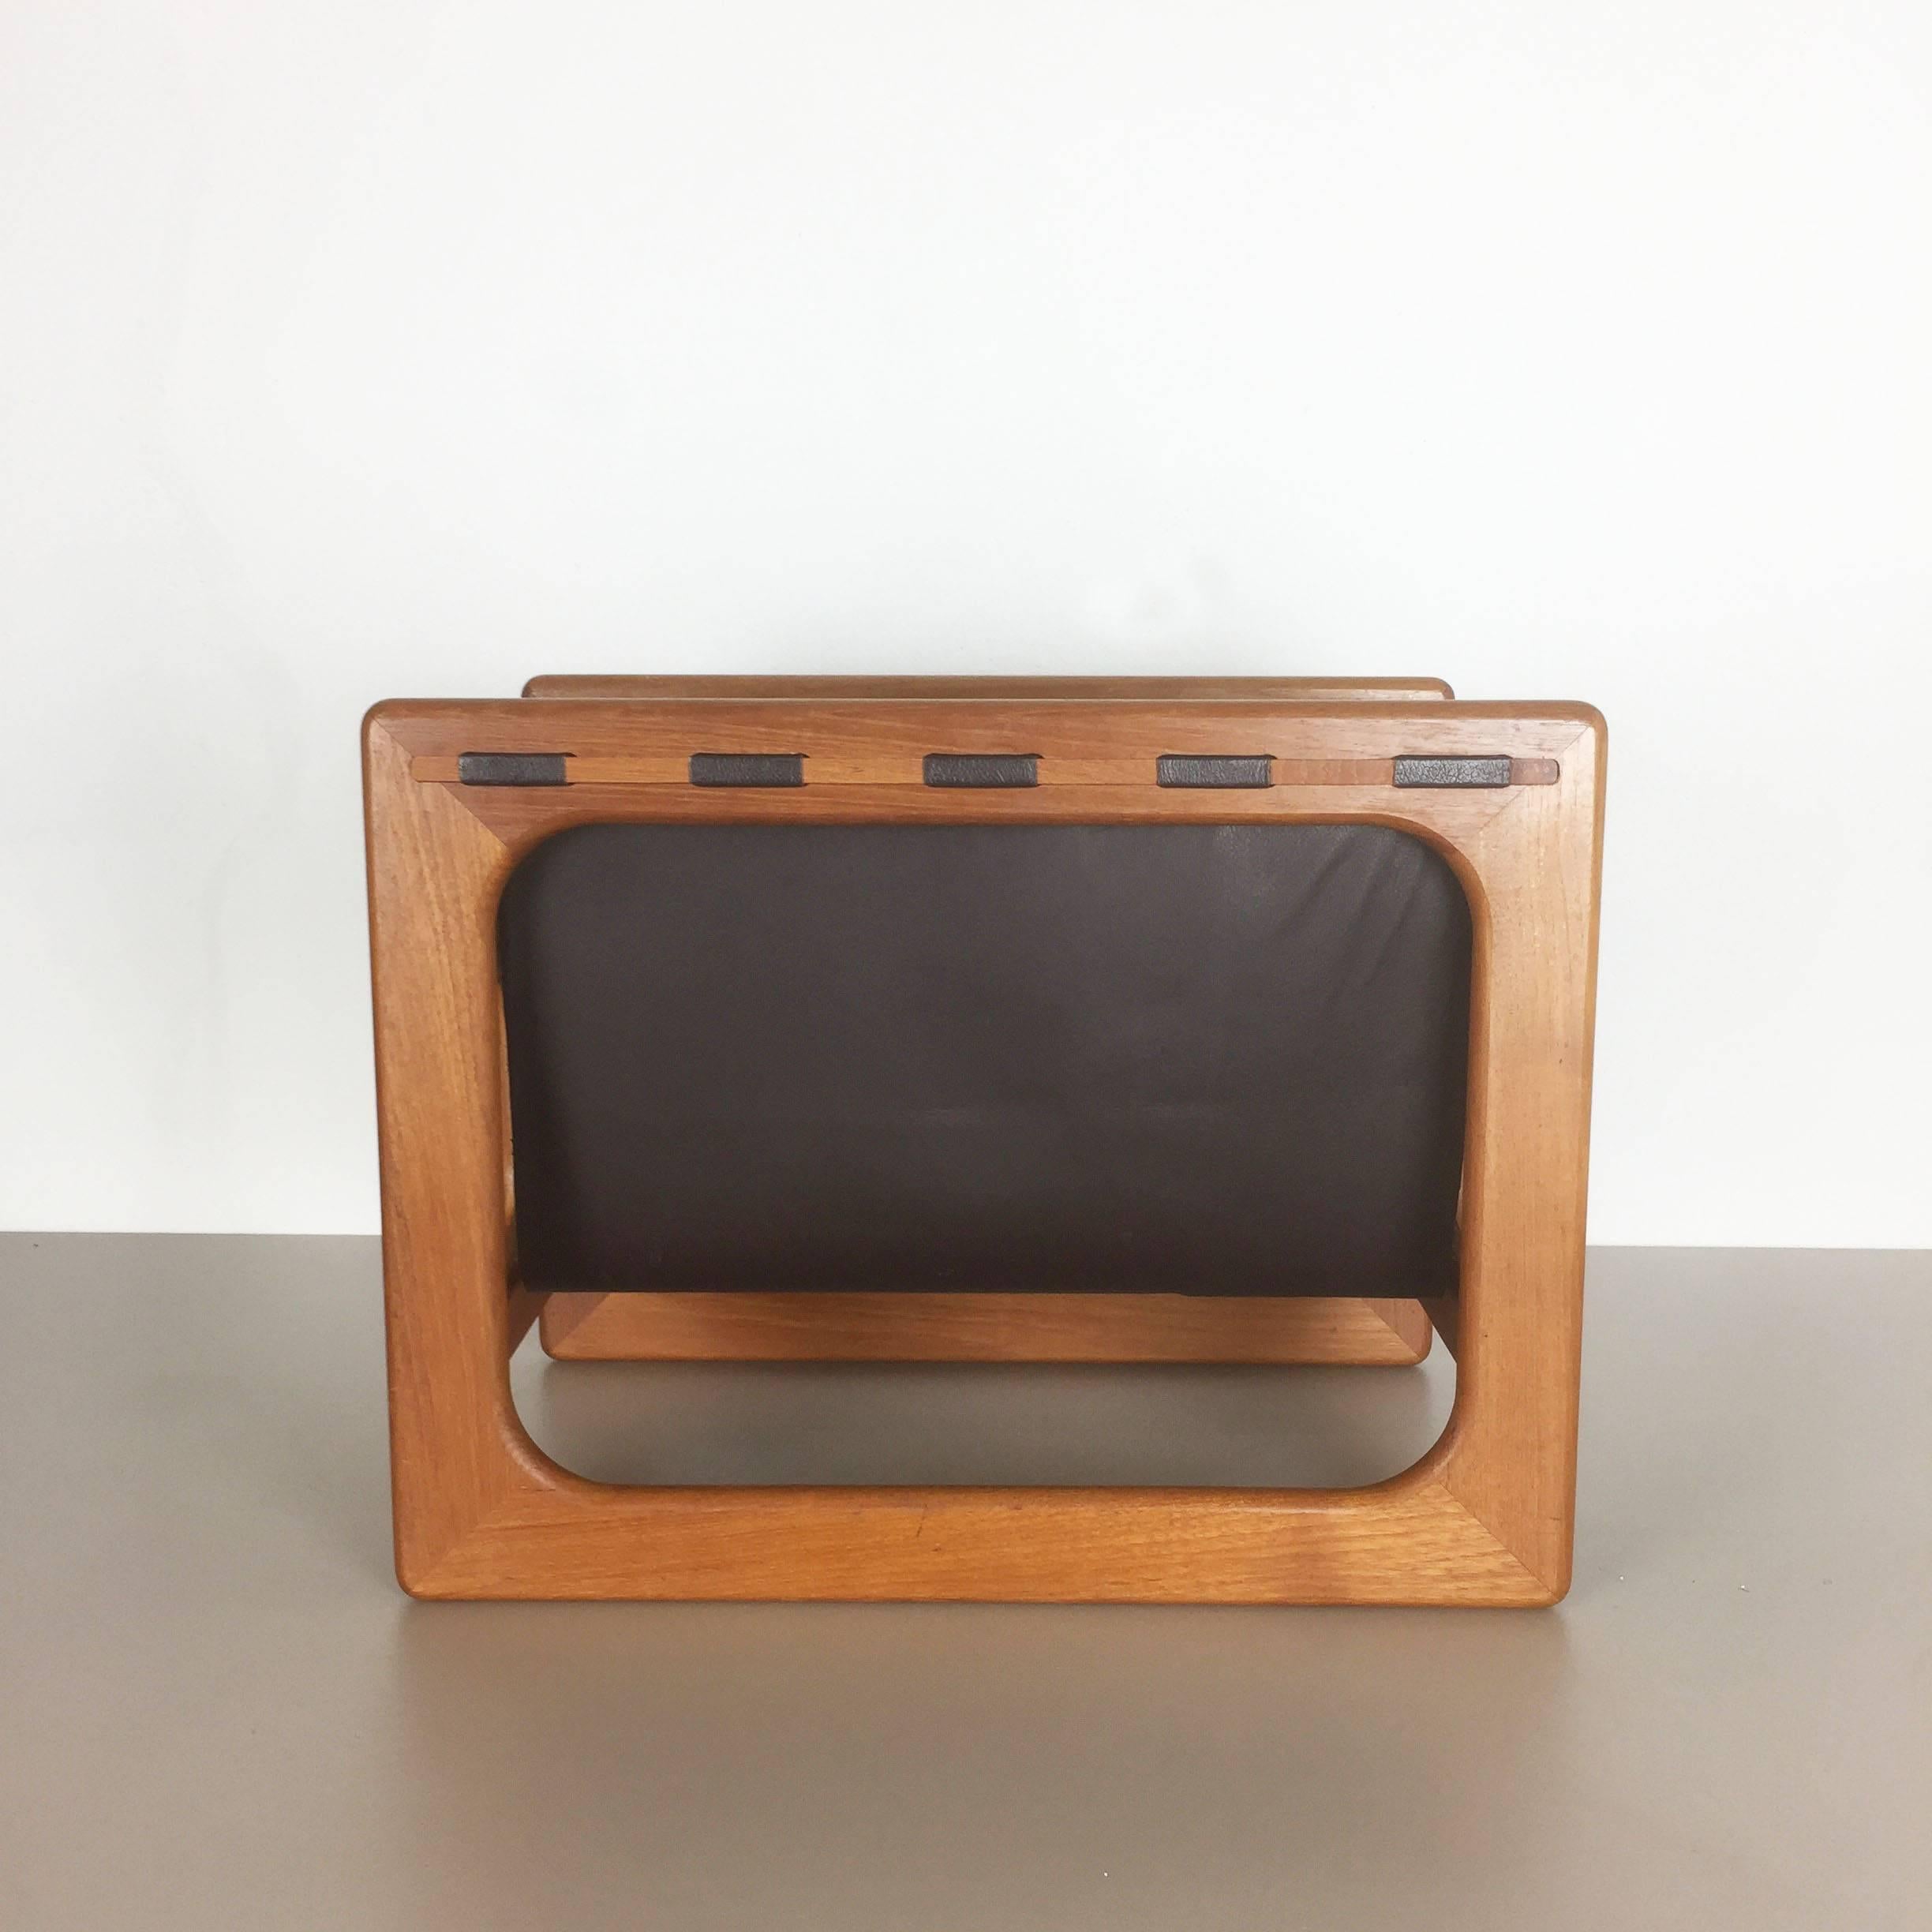 ARTICLE:

magazine rack



Producer:

SALIN MOBLER, Denmark



ORIGIN:

Denmark



AGE:

1970s



DESCRIPTION:
original 60s magazine rack made by Salin Mobler, Denmark. the frame is made of solid teak wood with real leather hanging compartments.